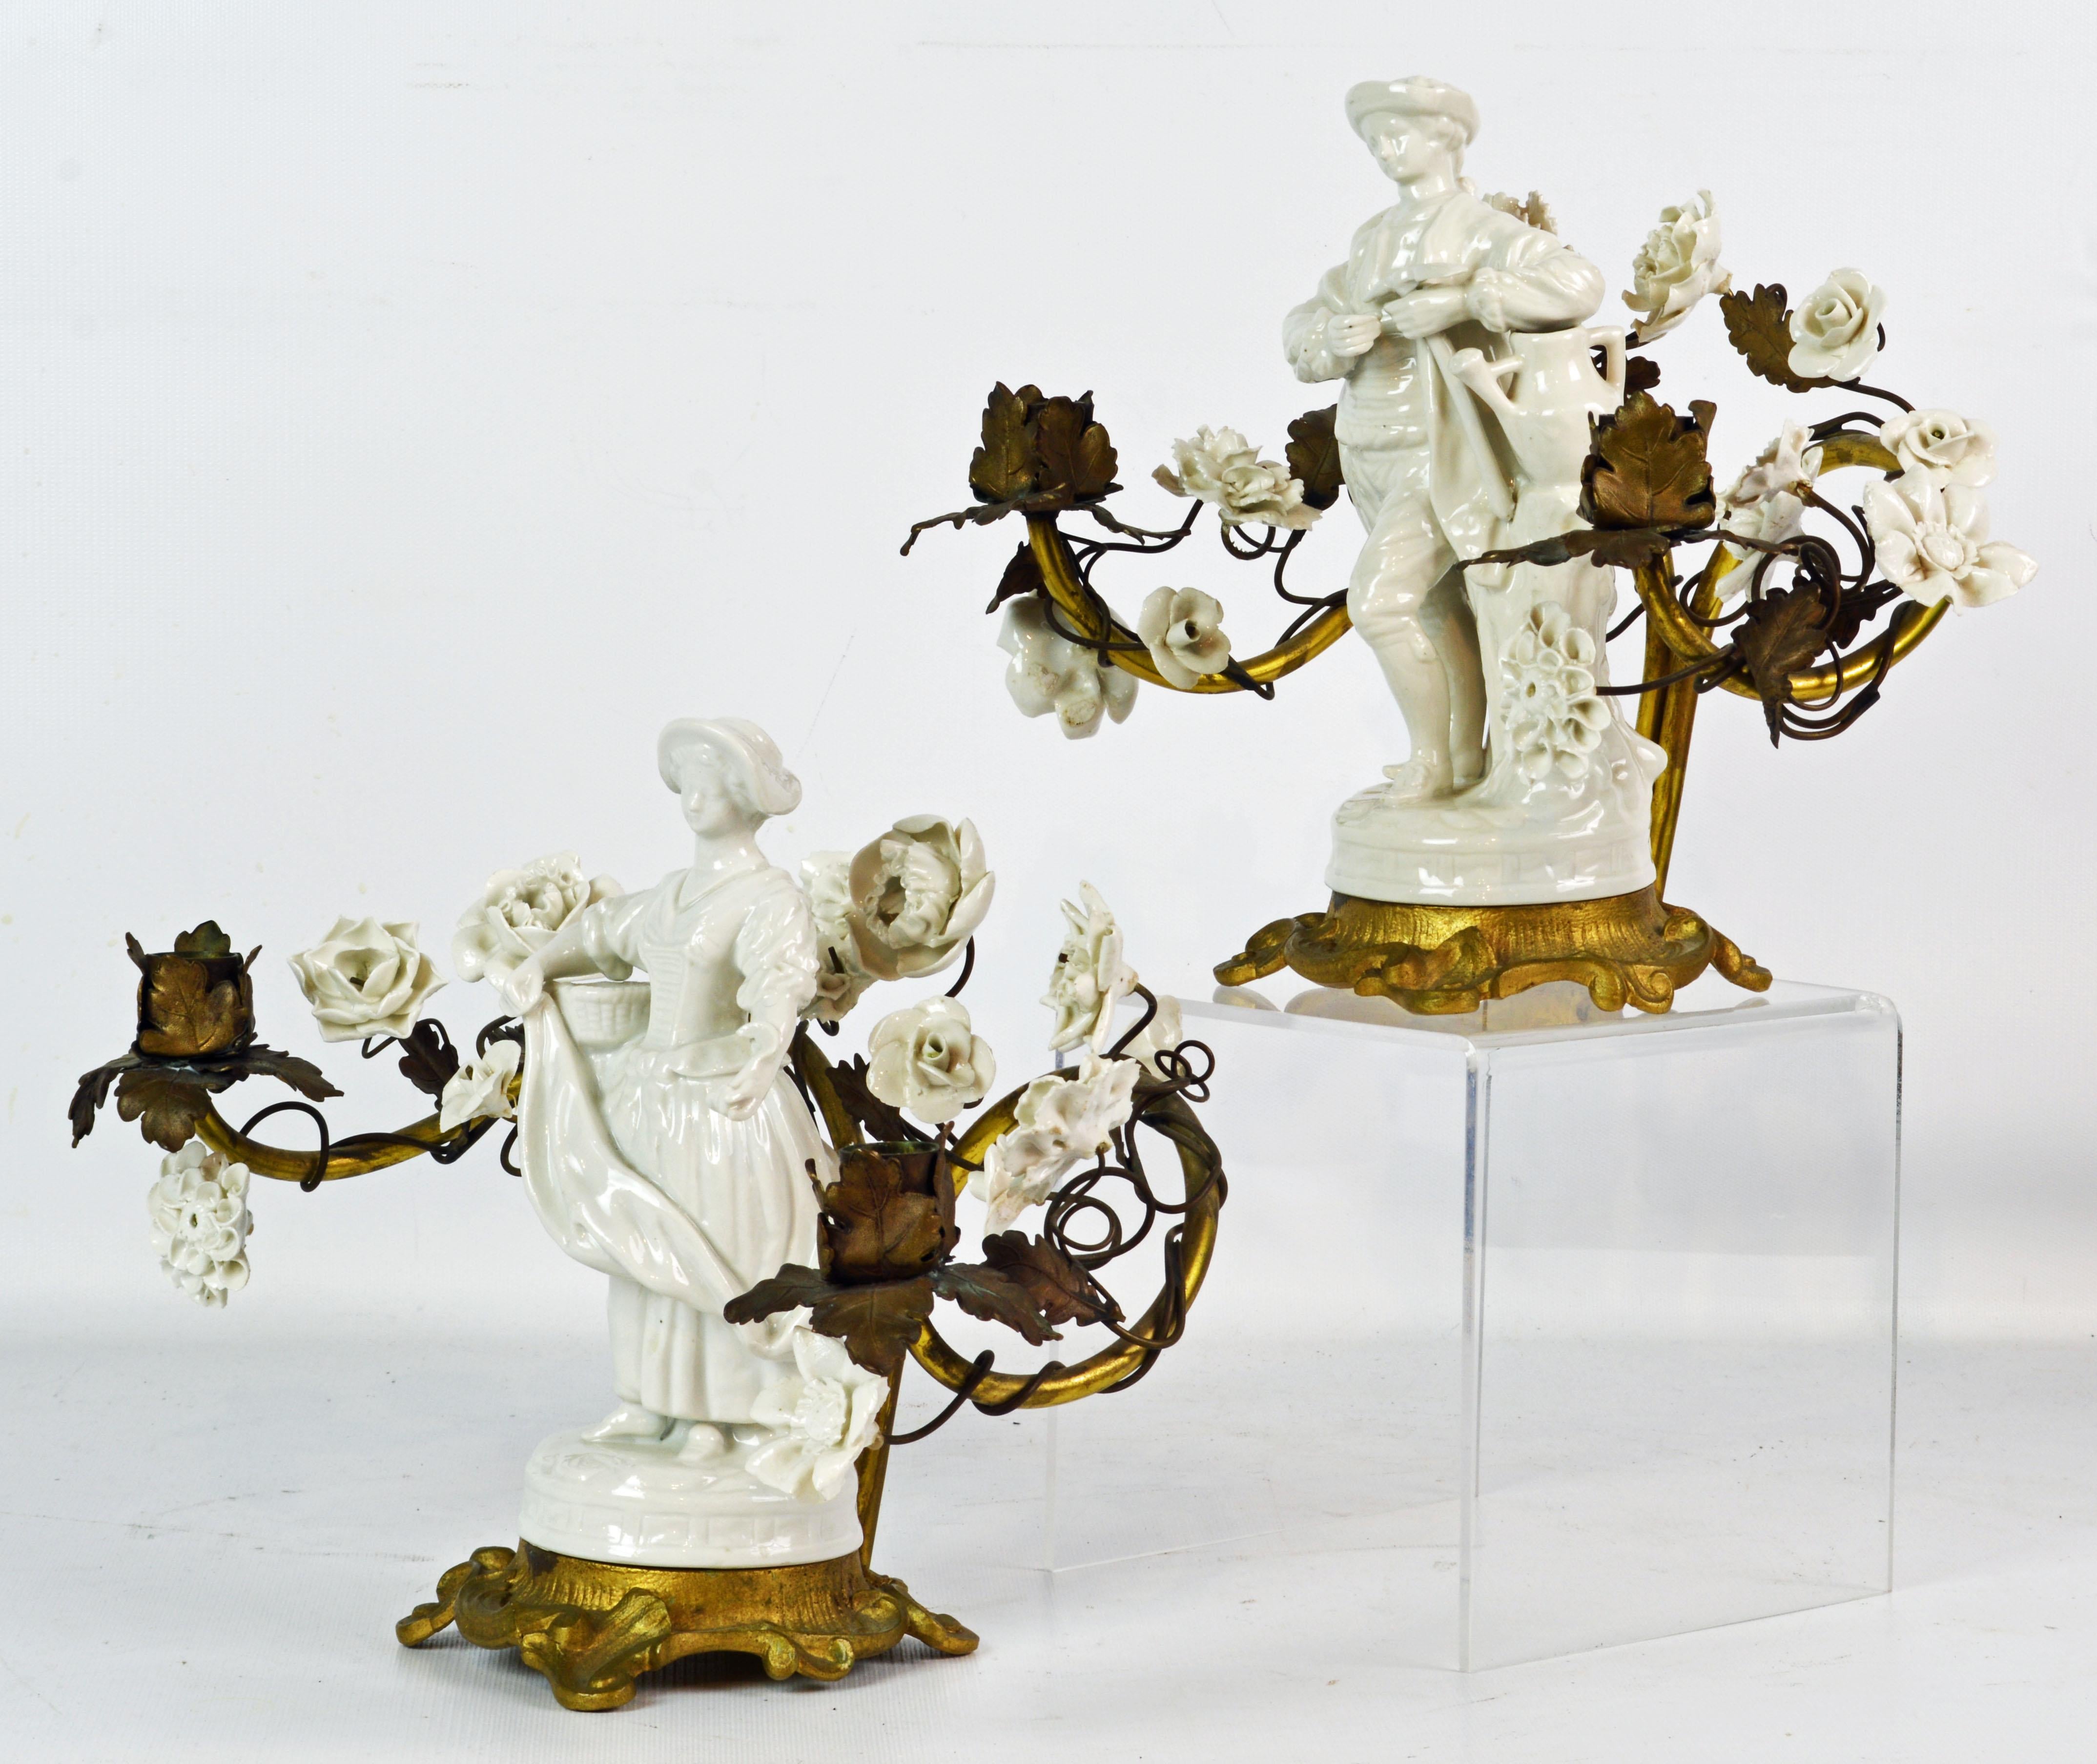 Dating to the late 19th century this pair of French Sevres style candelabras features blanc de chine porcelain central figures of a young man and a young woman as gardeners mounted upon Rococo style gilt bronze bases. The two light arms, richly